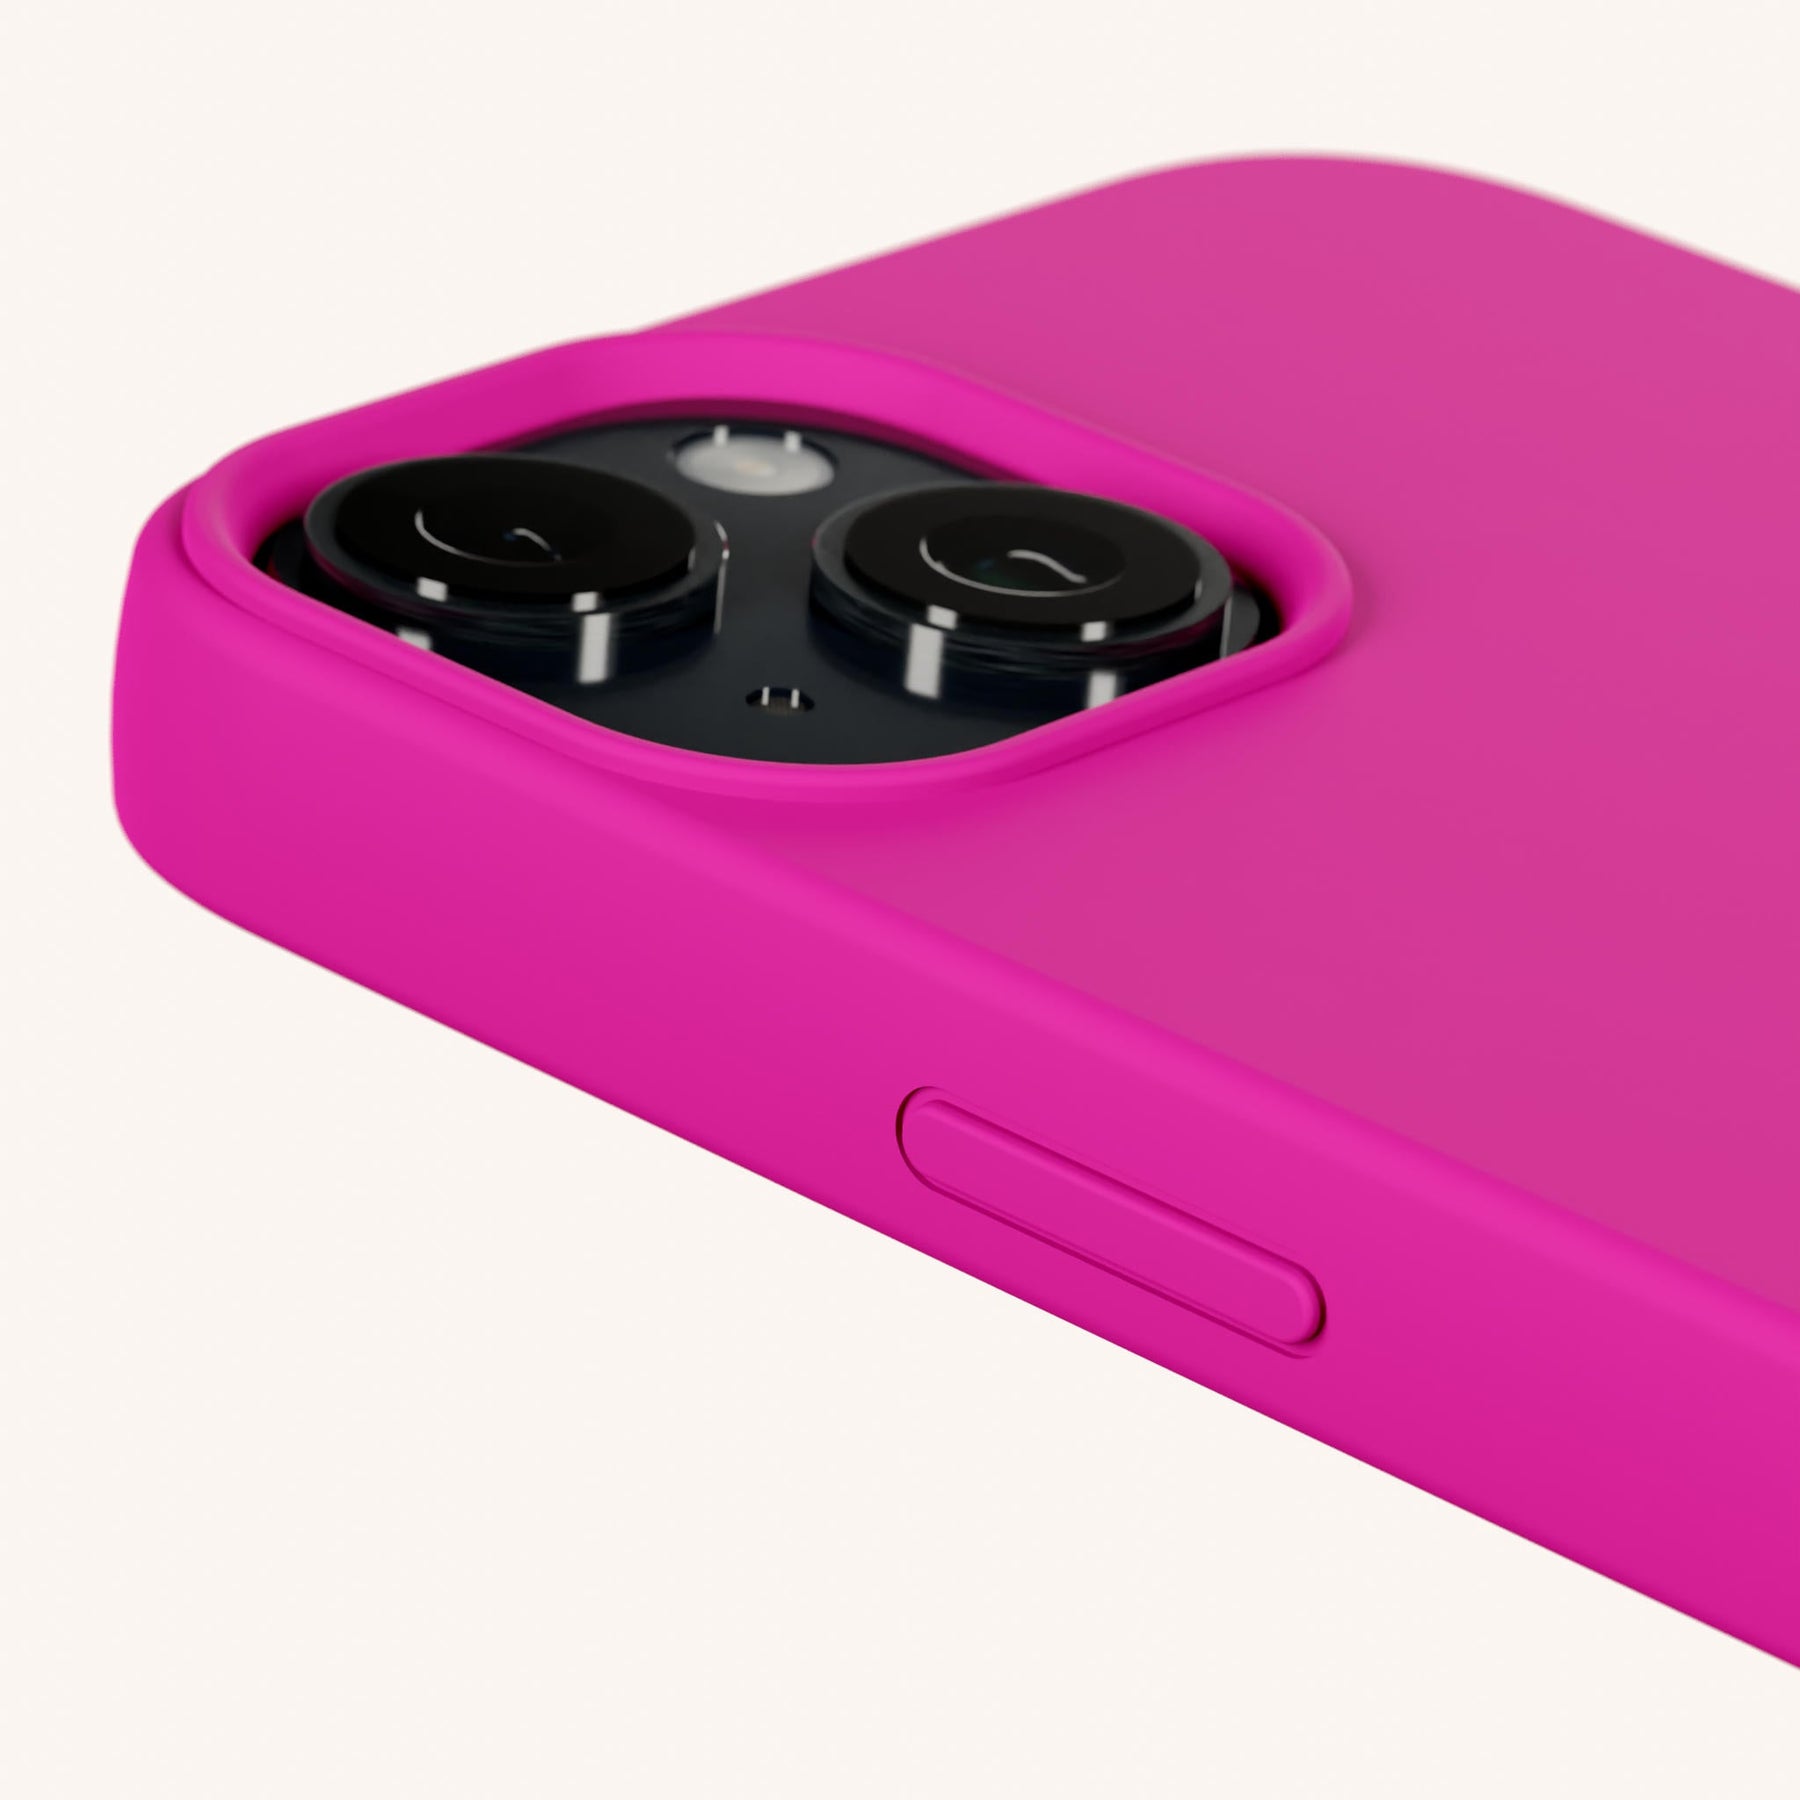 Phone Case in Power Pink